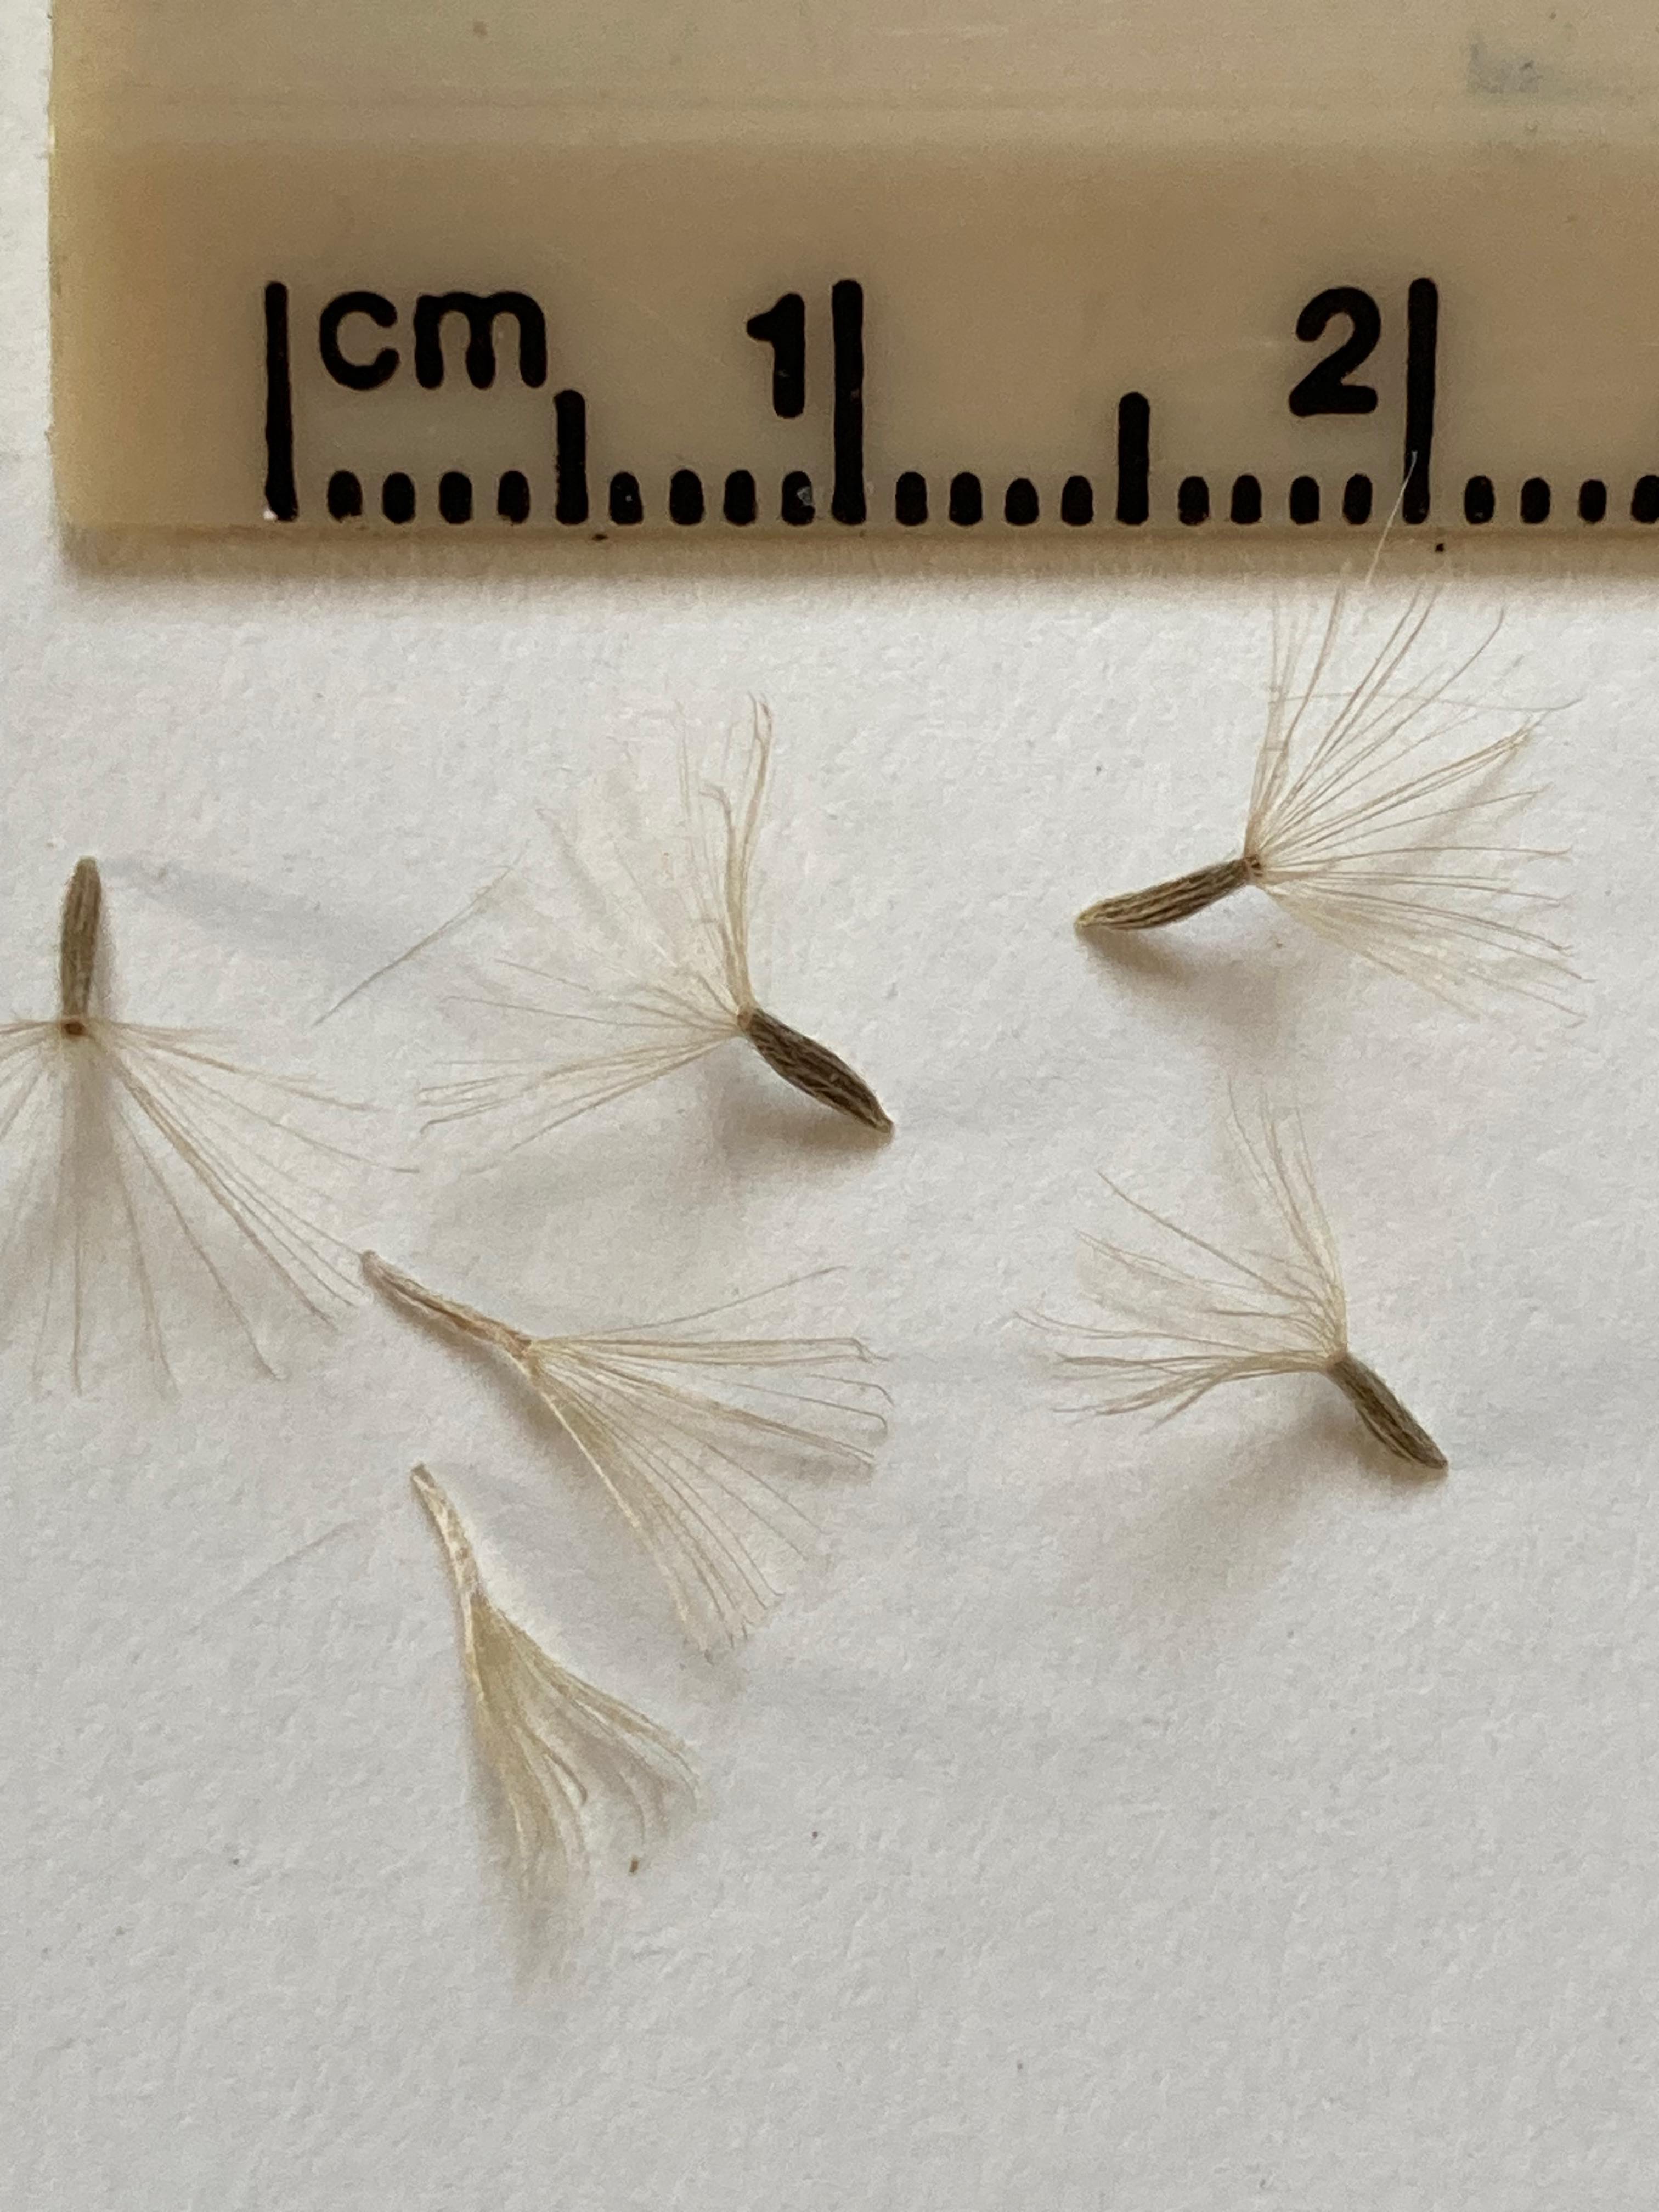 The Scientific Name is Symphyotrichum patens [= Aster patens]. You will likely hear them called Common Clasping Aster, Late Purple Aster. This picture shows the Harvested achenes with pappus (ring of fine hairs for wind dispersal). Not all these achenes look viable. of Symphyotrichum patens [= Aster patens]